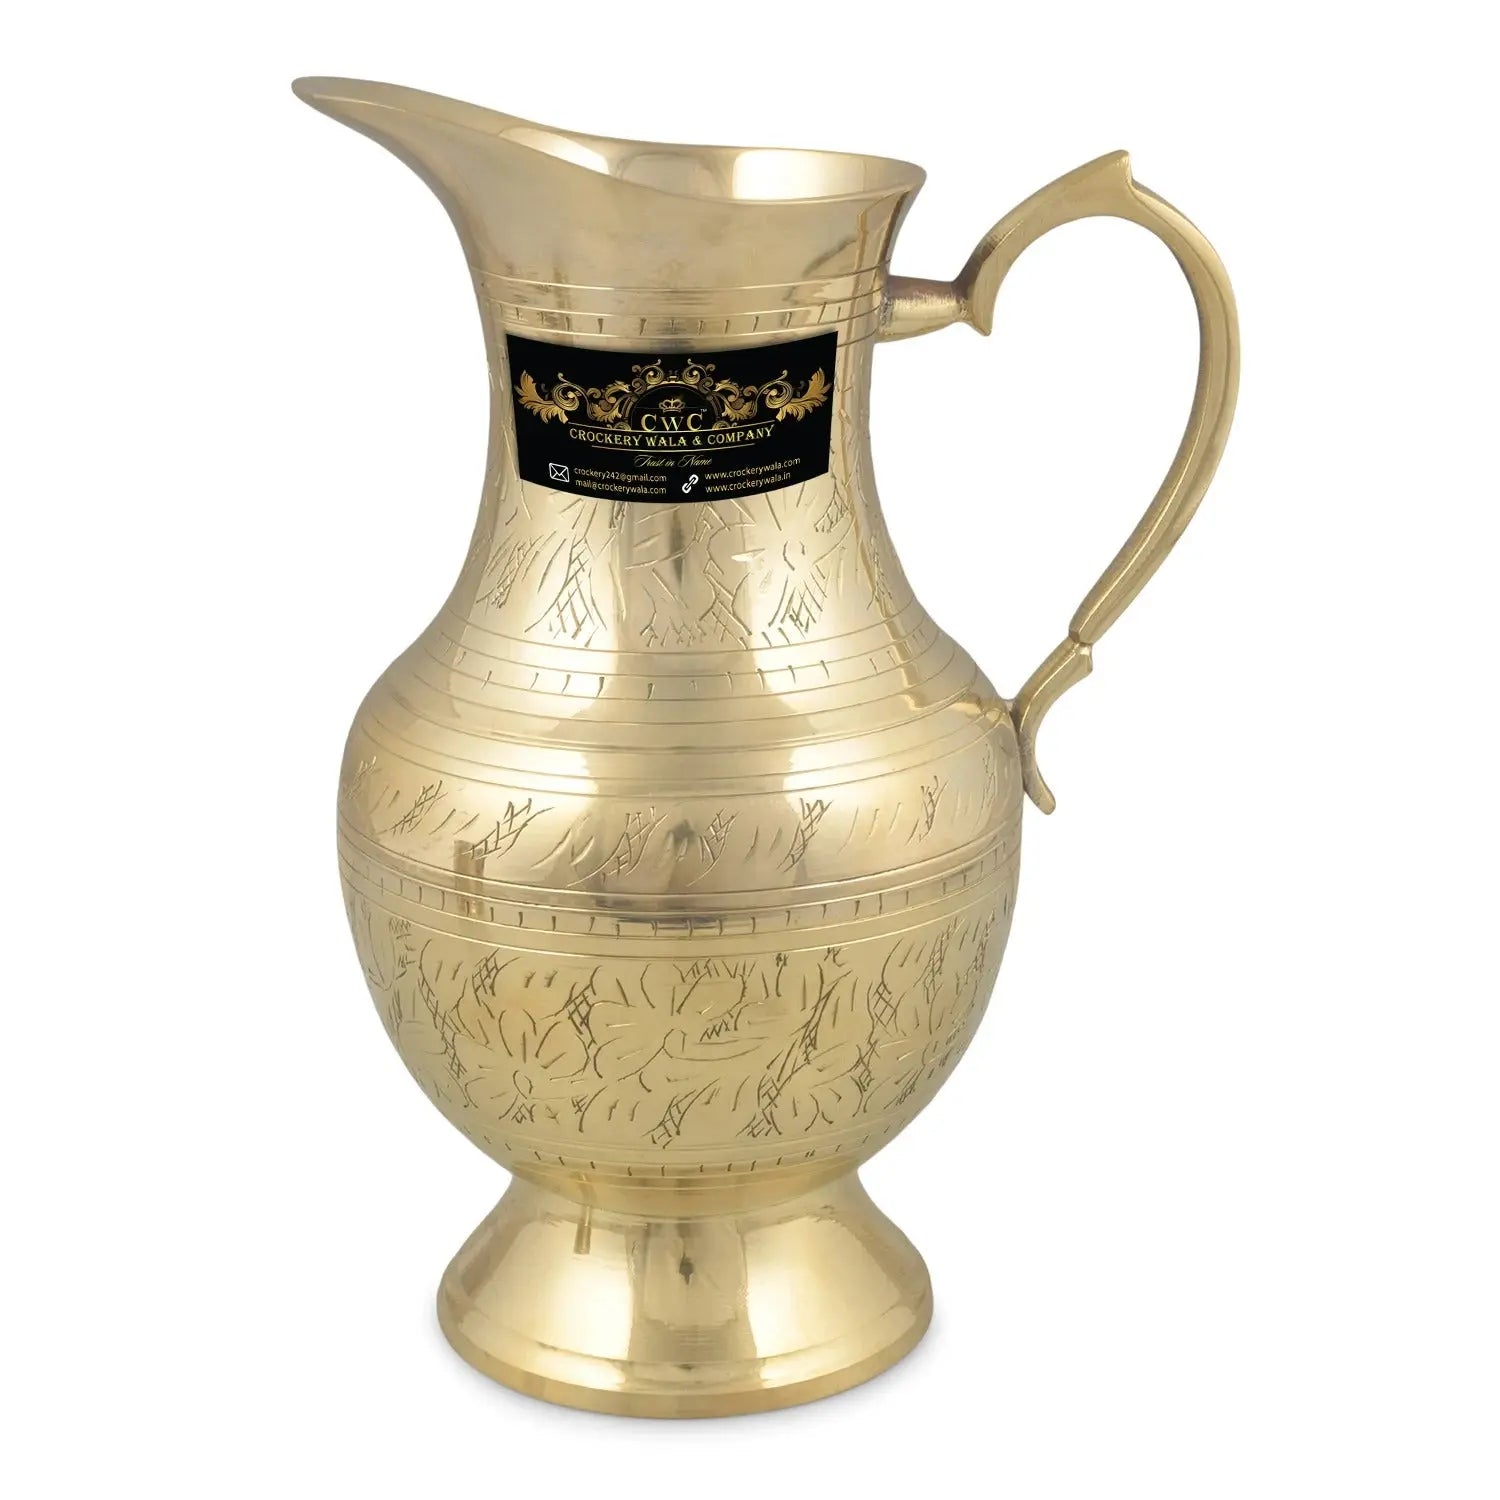 Pure Brass Embossed Design Mughlai Style Jug Pitcher Jar for Storing Serving Water 1050 ml - CROCKERY WALA AND COMPANY 